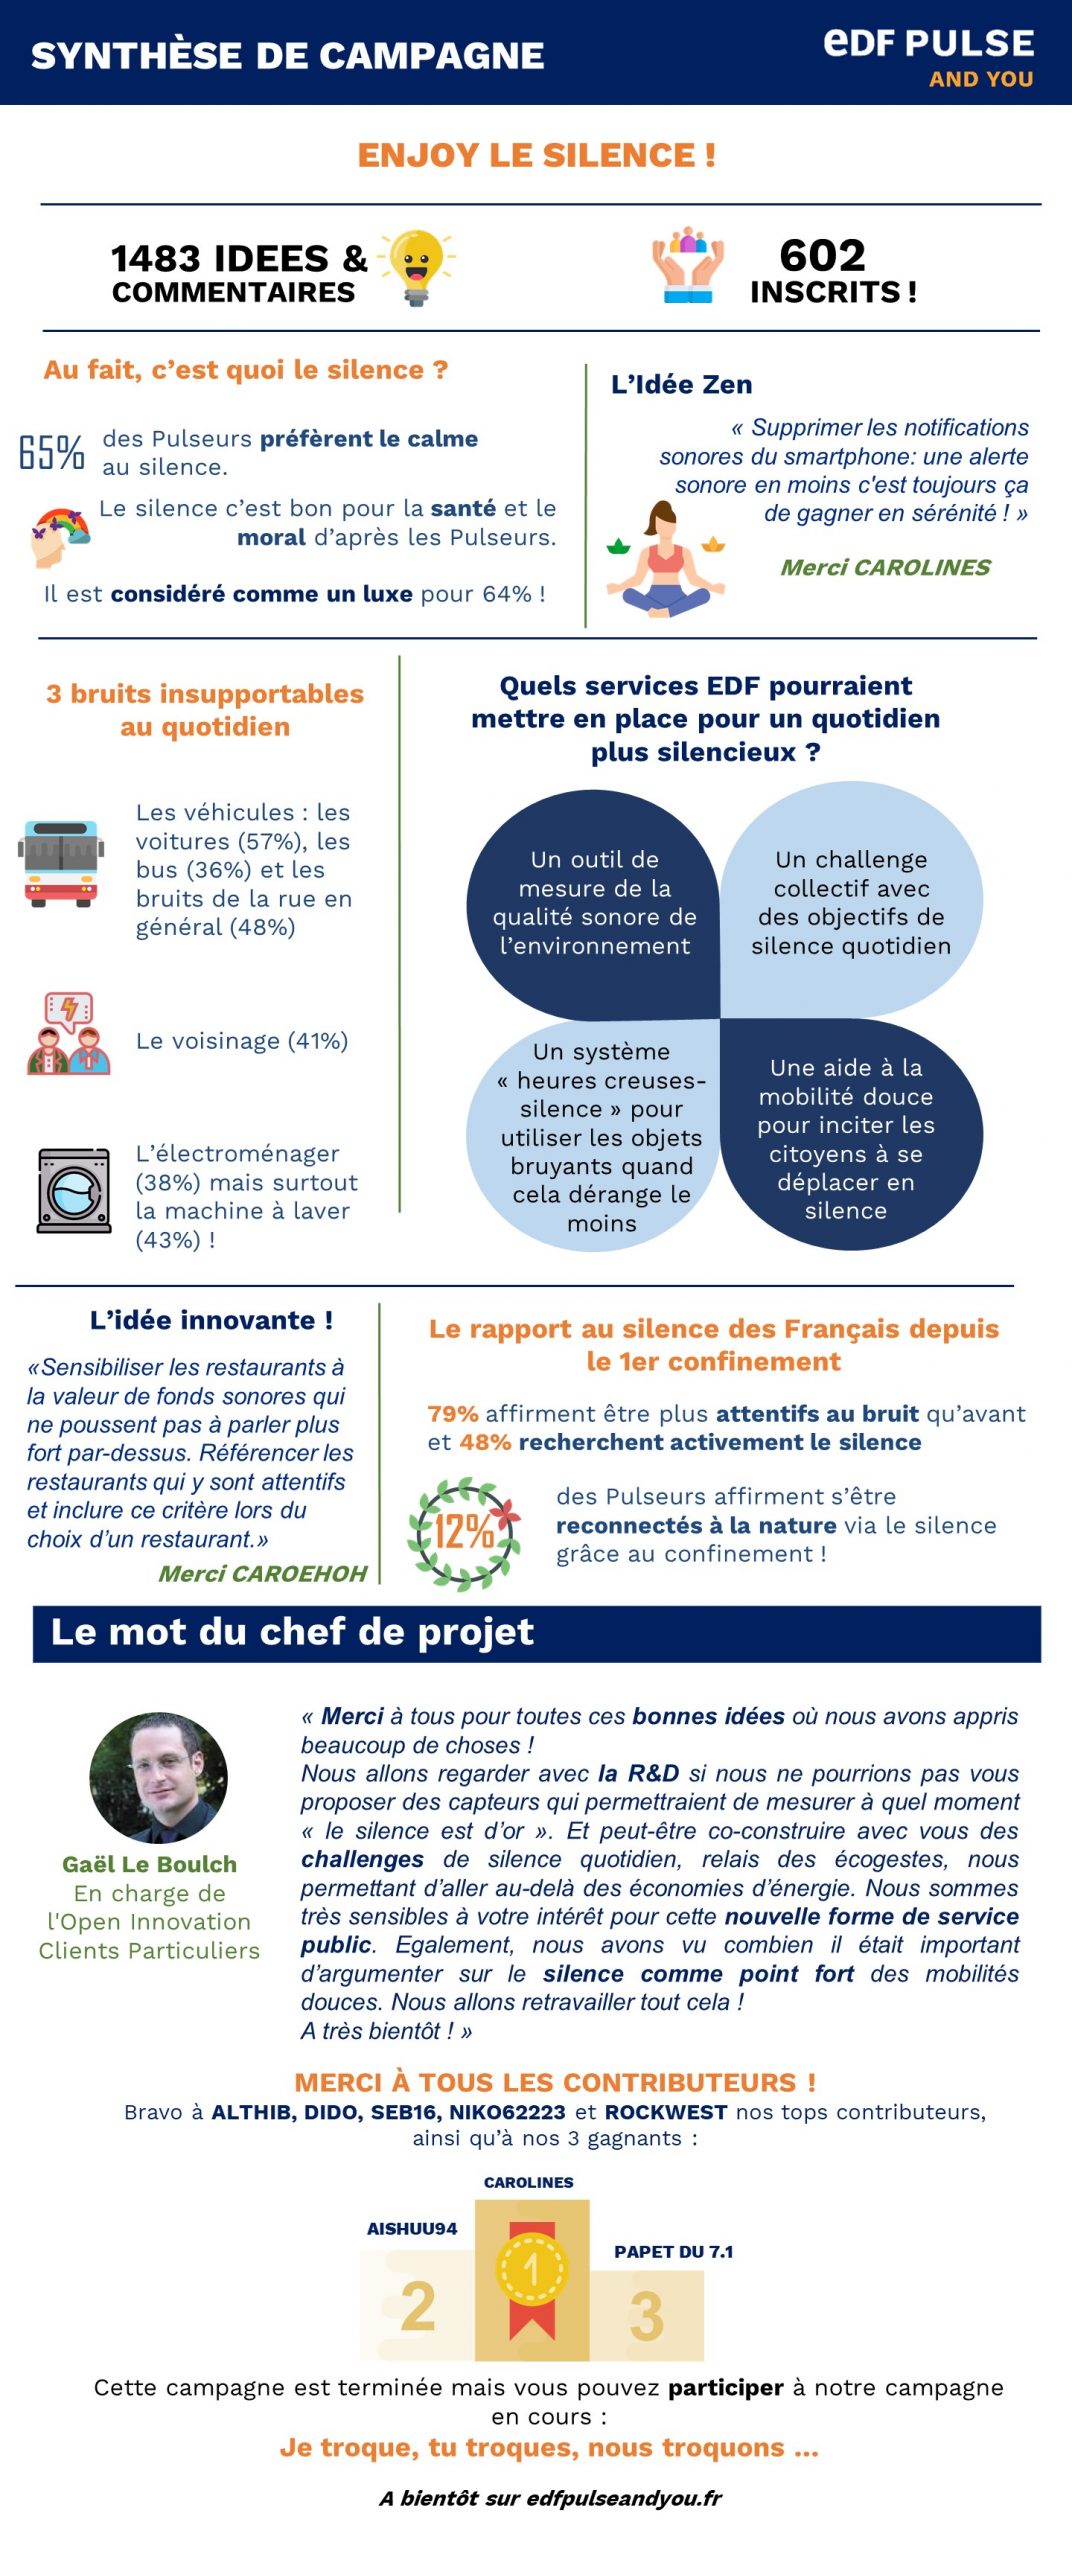 infographie - edf pulse and you